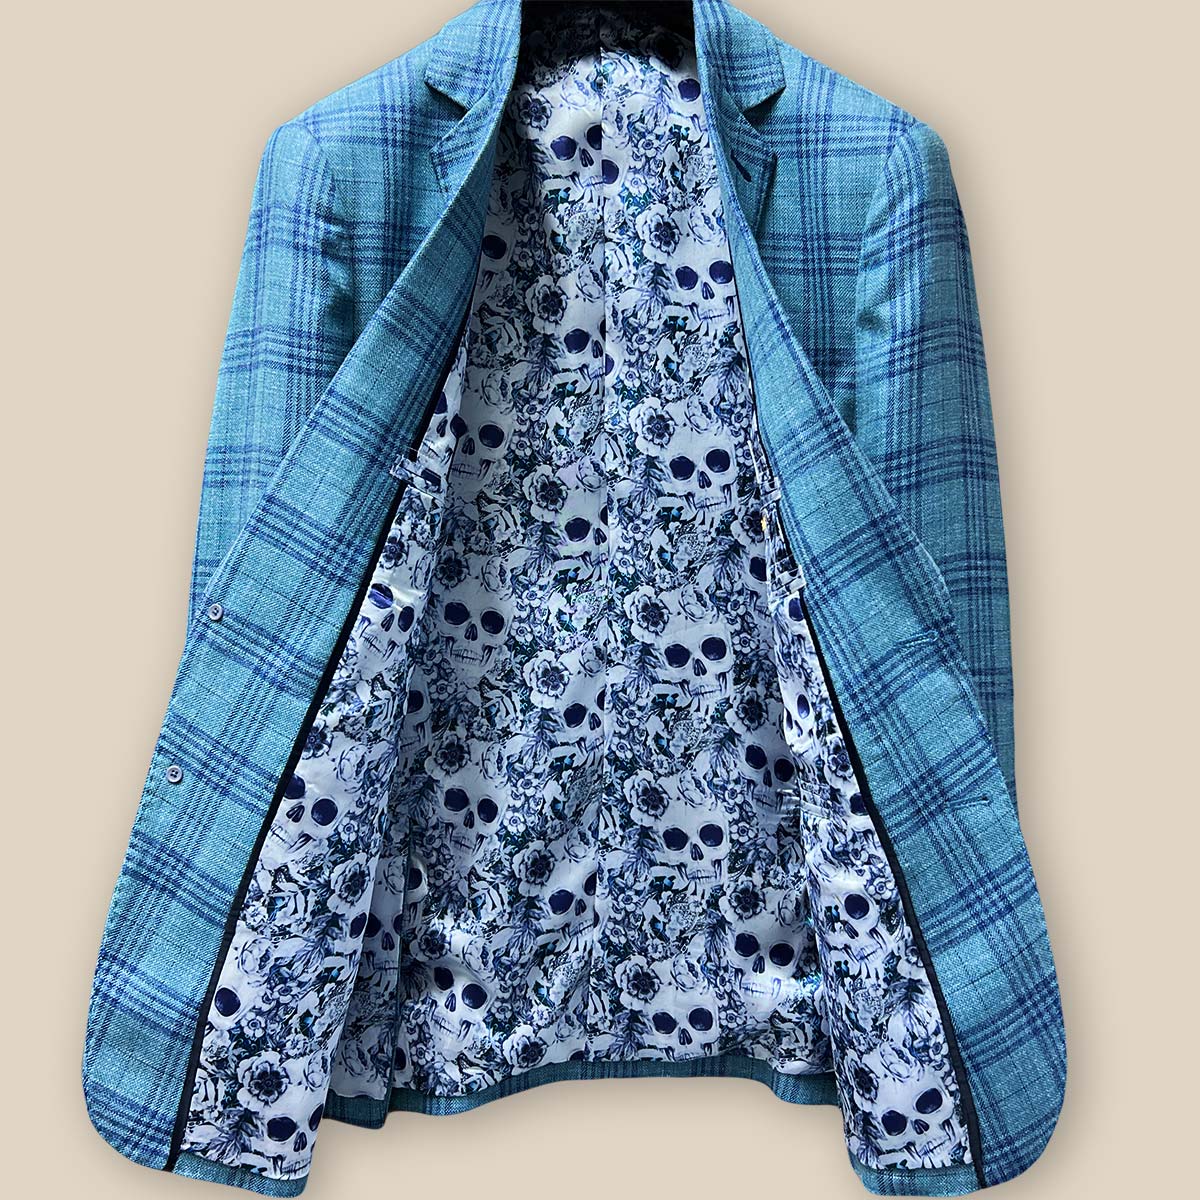 Full view of the men's sportcoat's interior, highlighting the intricate blue and white rose and skull fancy lining.